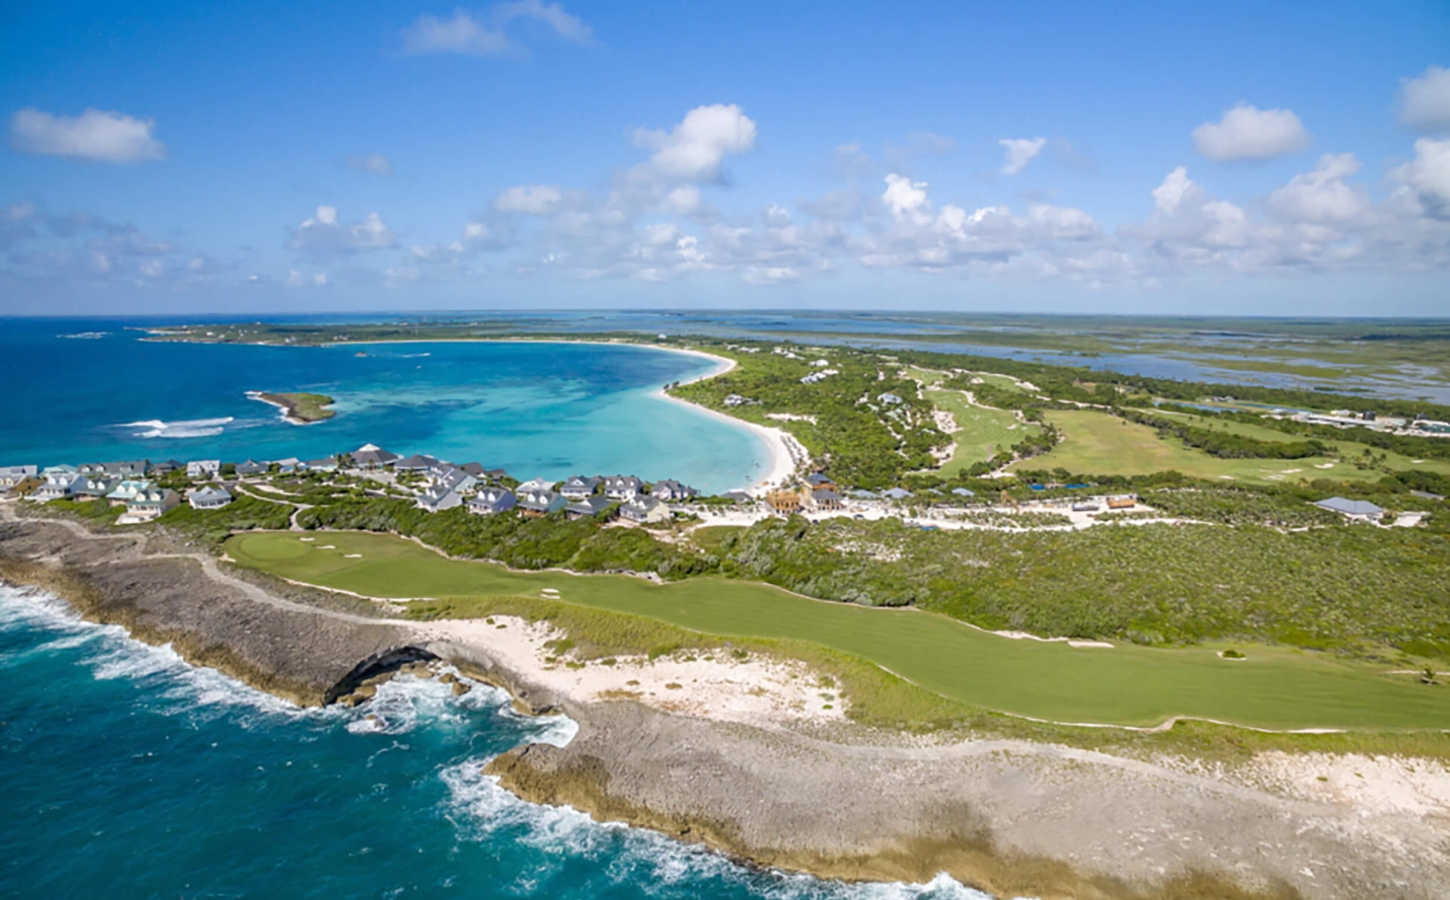 Breathtaking aerial side view of The Abaco Club's shoreline, showcasing the club lifestyle and luxury coastal living in The Bahamas.